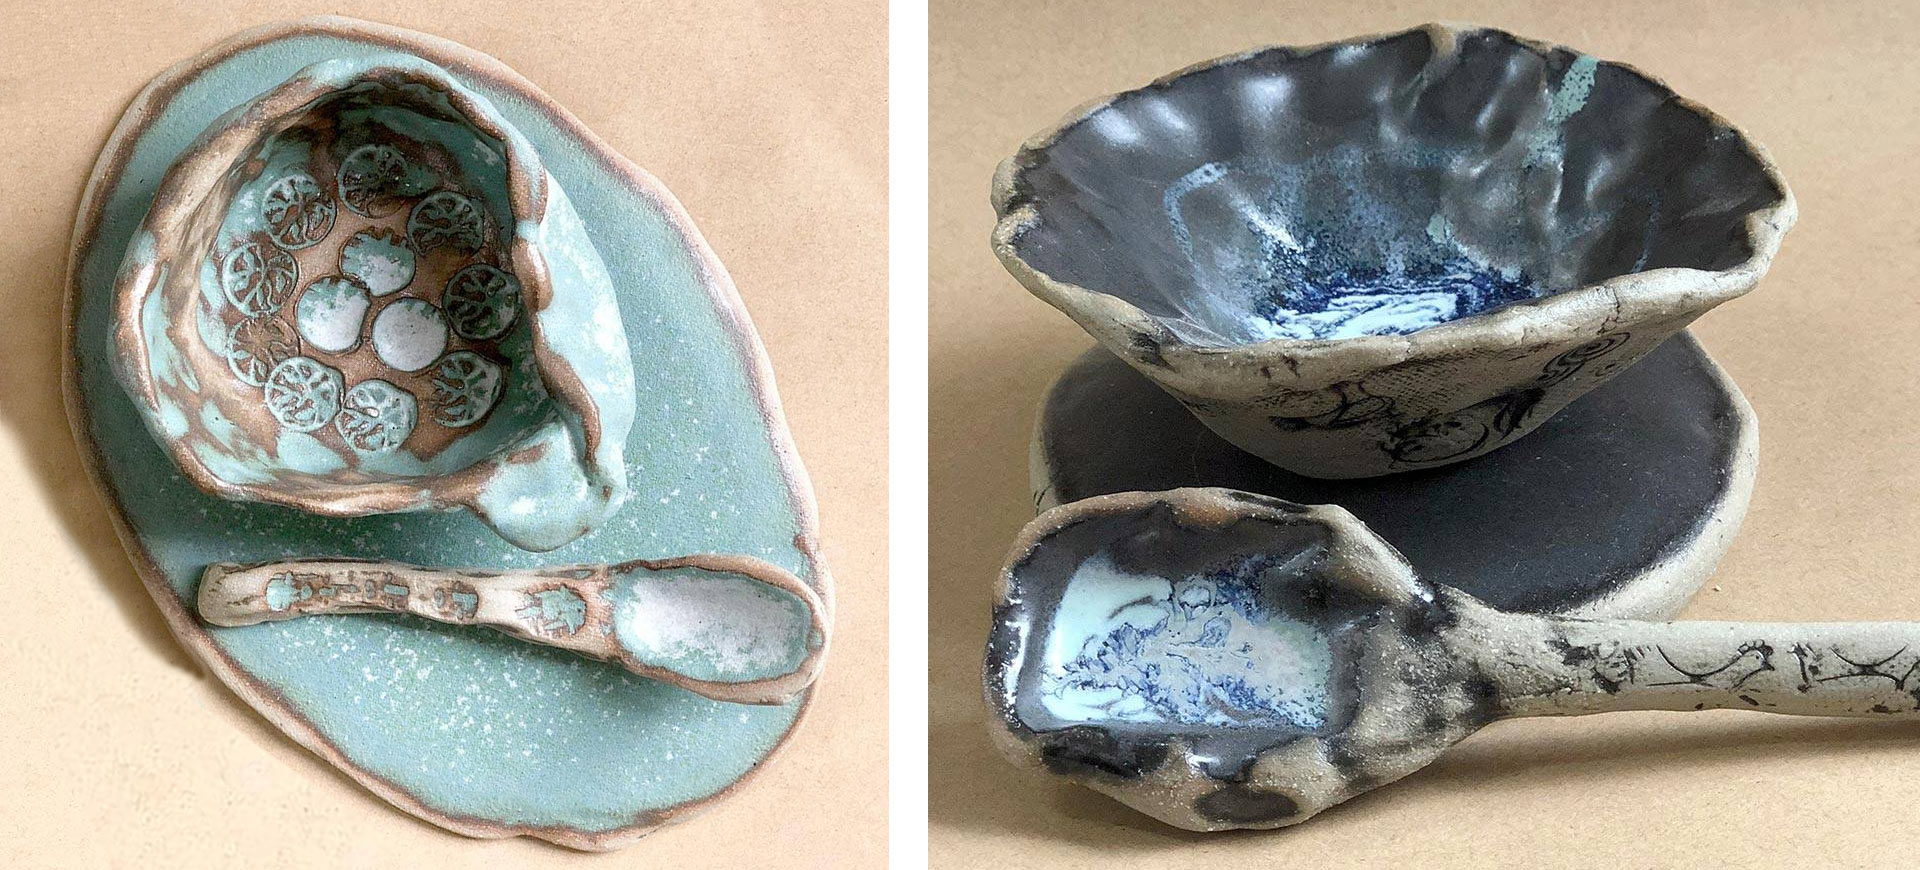 photo of ceramic bowls and spoons from Art Connects